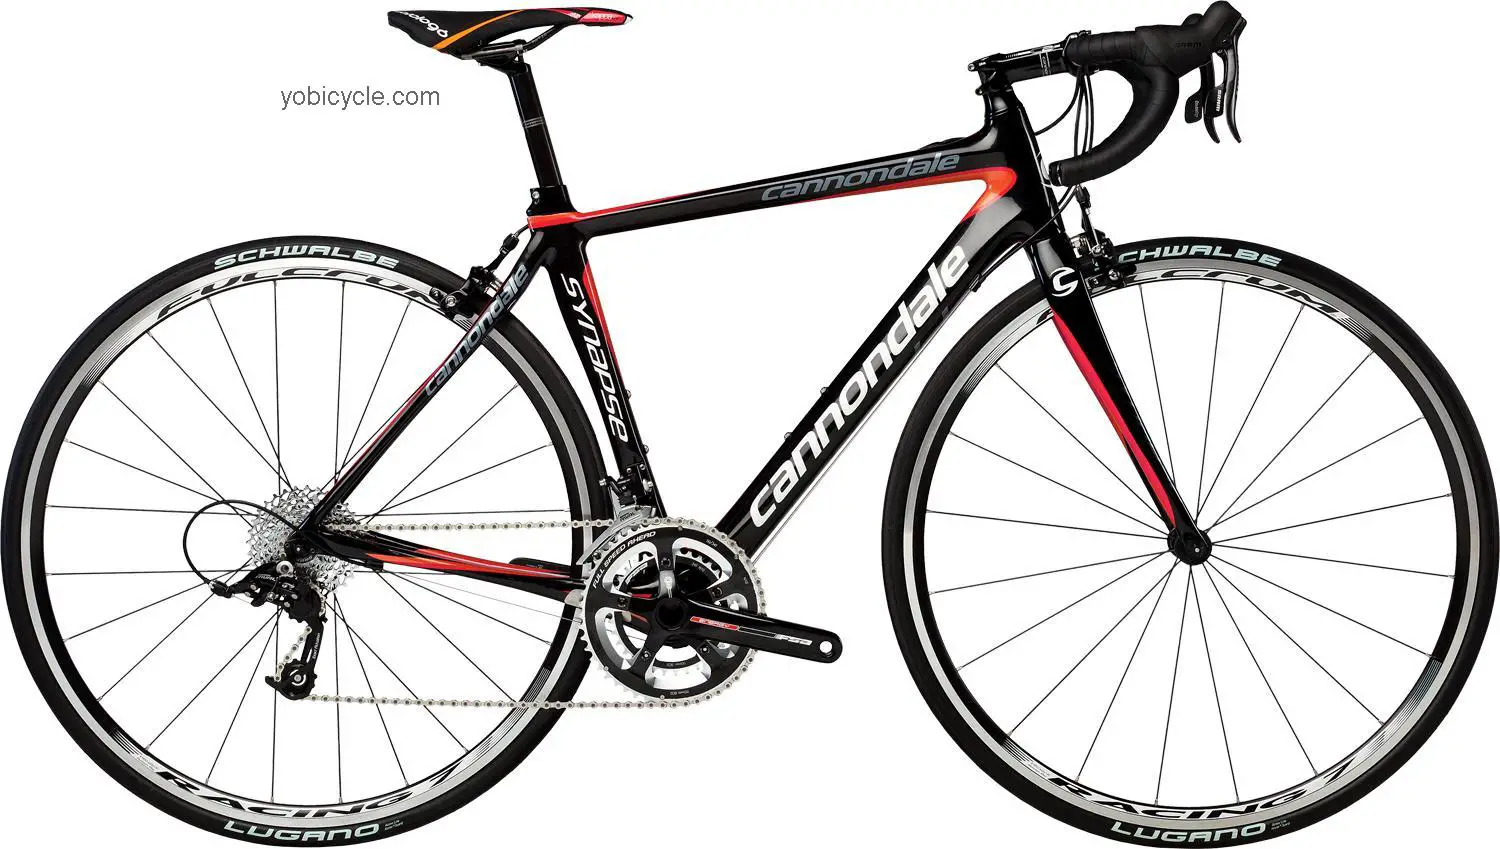 Cannondale Synapse Carbon Womens 4 Rival 2013 comparison online with competitors